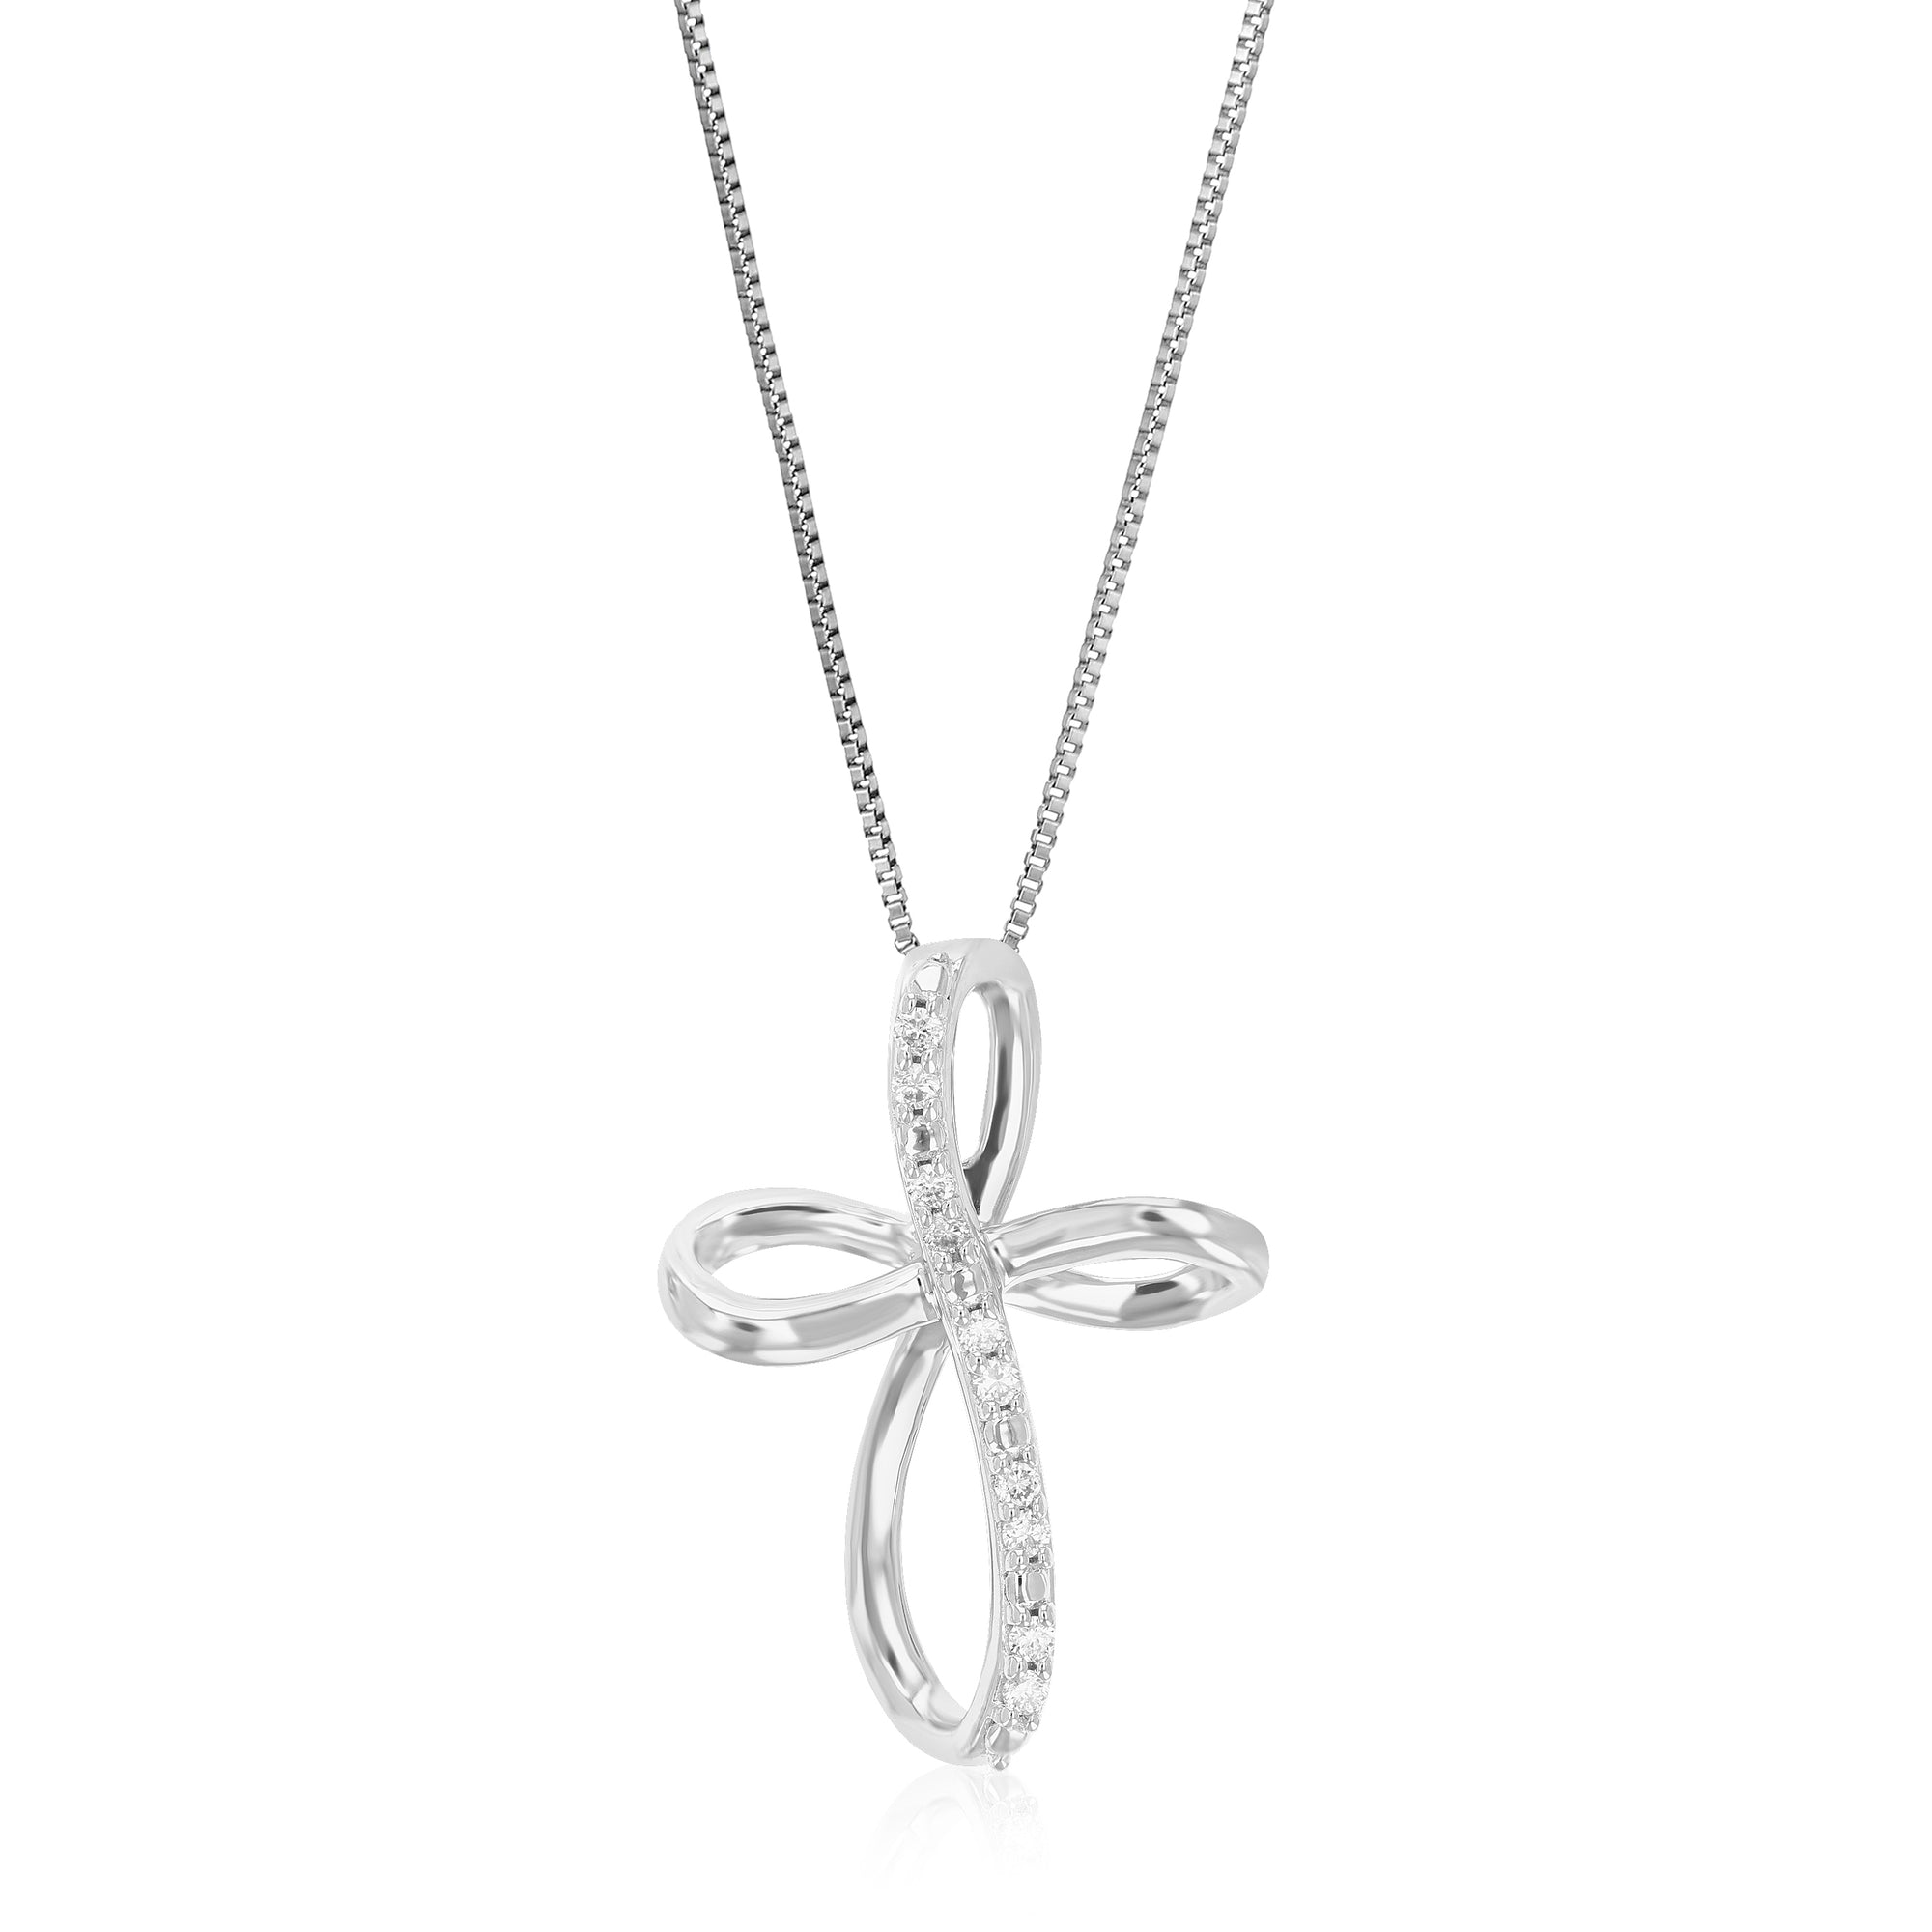 1/10 cttw Diamond Pendant Necklace for Women, Lab Grown Diamond Cross Pendant Necklace in .925 Sterling Silver with Chain, Size 2/3 Inch